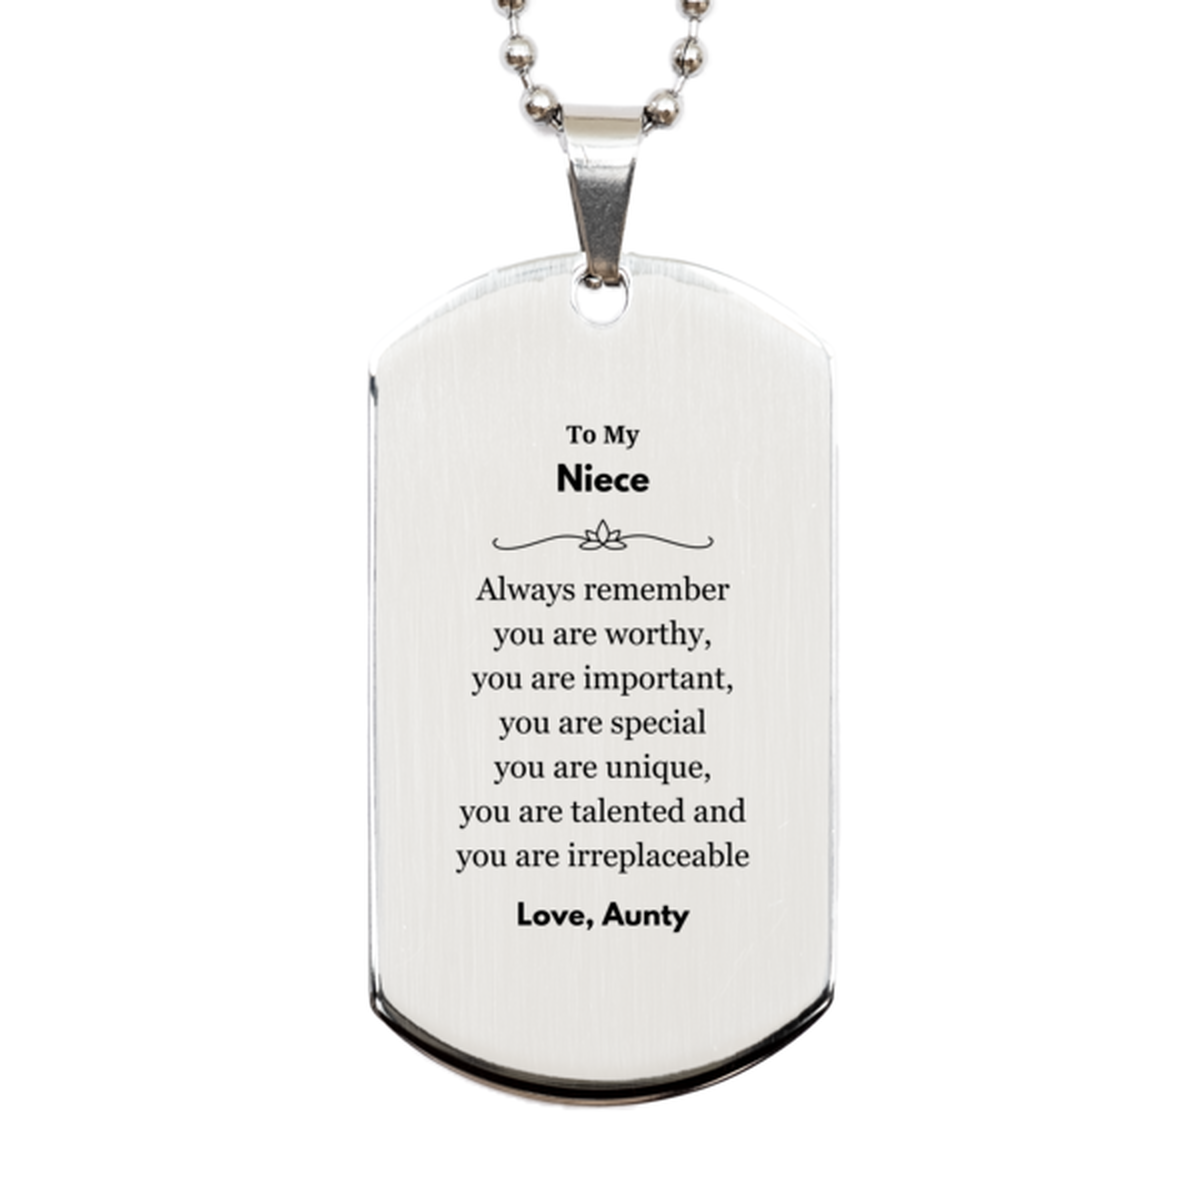 Niece Birthday Gifts from Aunty, Inspirational Silver Dog Tag for Niece Christmas Graduation Gifts for Niece Always remember you are worthy, you are important. Love, Aunty